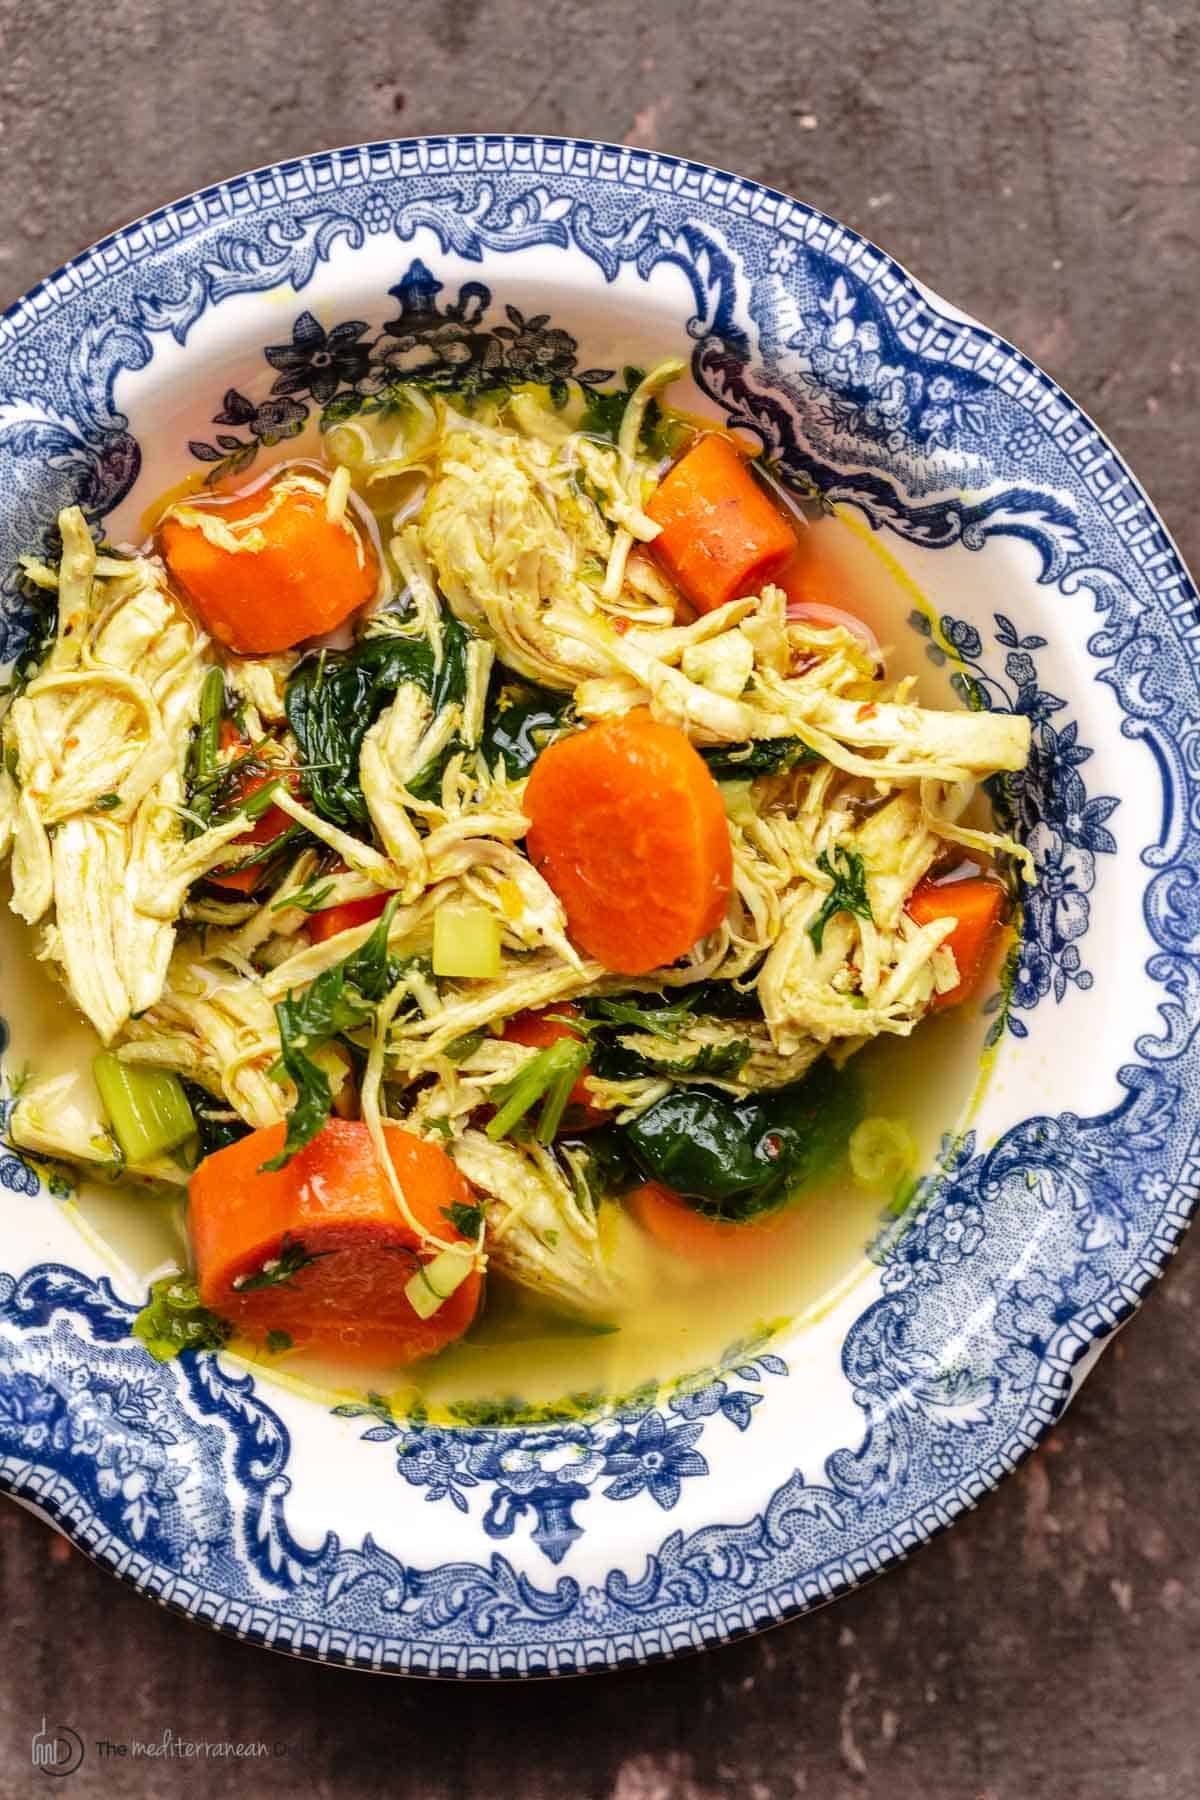 Healthy Gluten Free Chicken Noodle Soup - Nutritious Delights